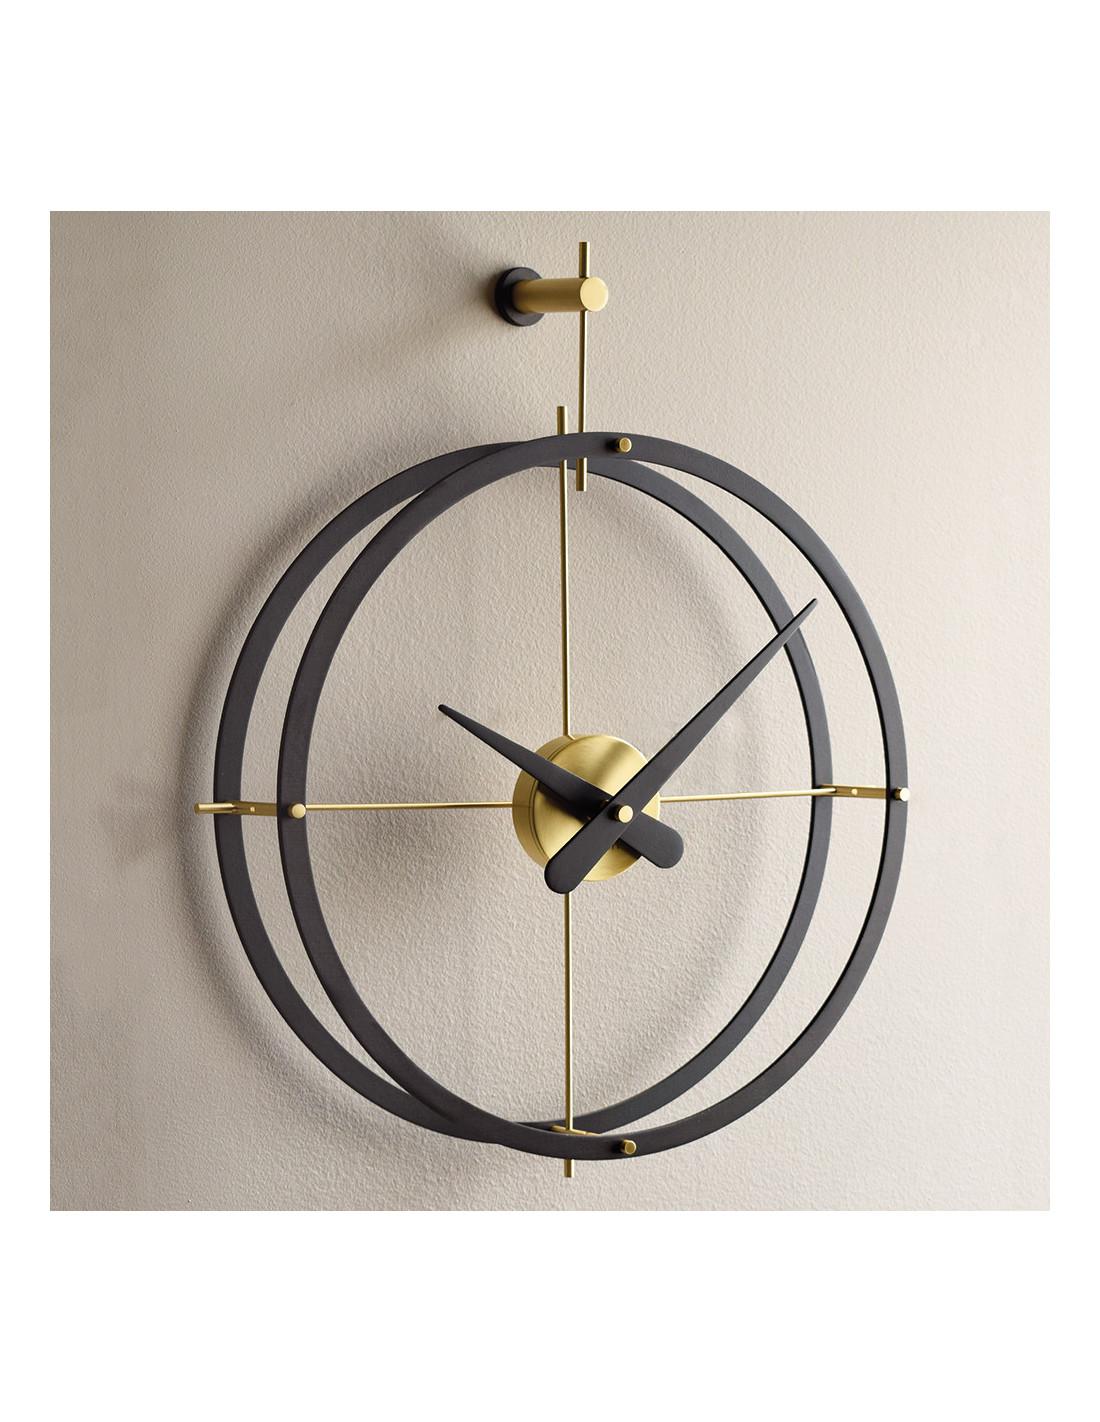 This is a wall clock with a double wooden ring, gold box and wooden needles. The mechanism is covered by the case made of polished brass. 
2 puntos NG wall clock : Rings and hands in wenge finished wood, box in polished brass.
Not OK for Outdoor